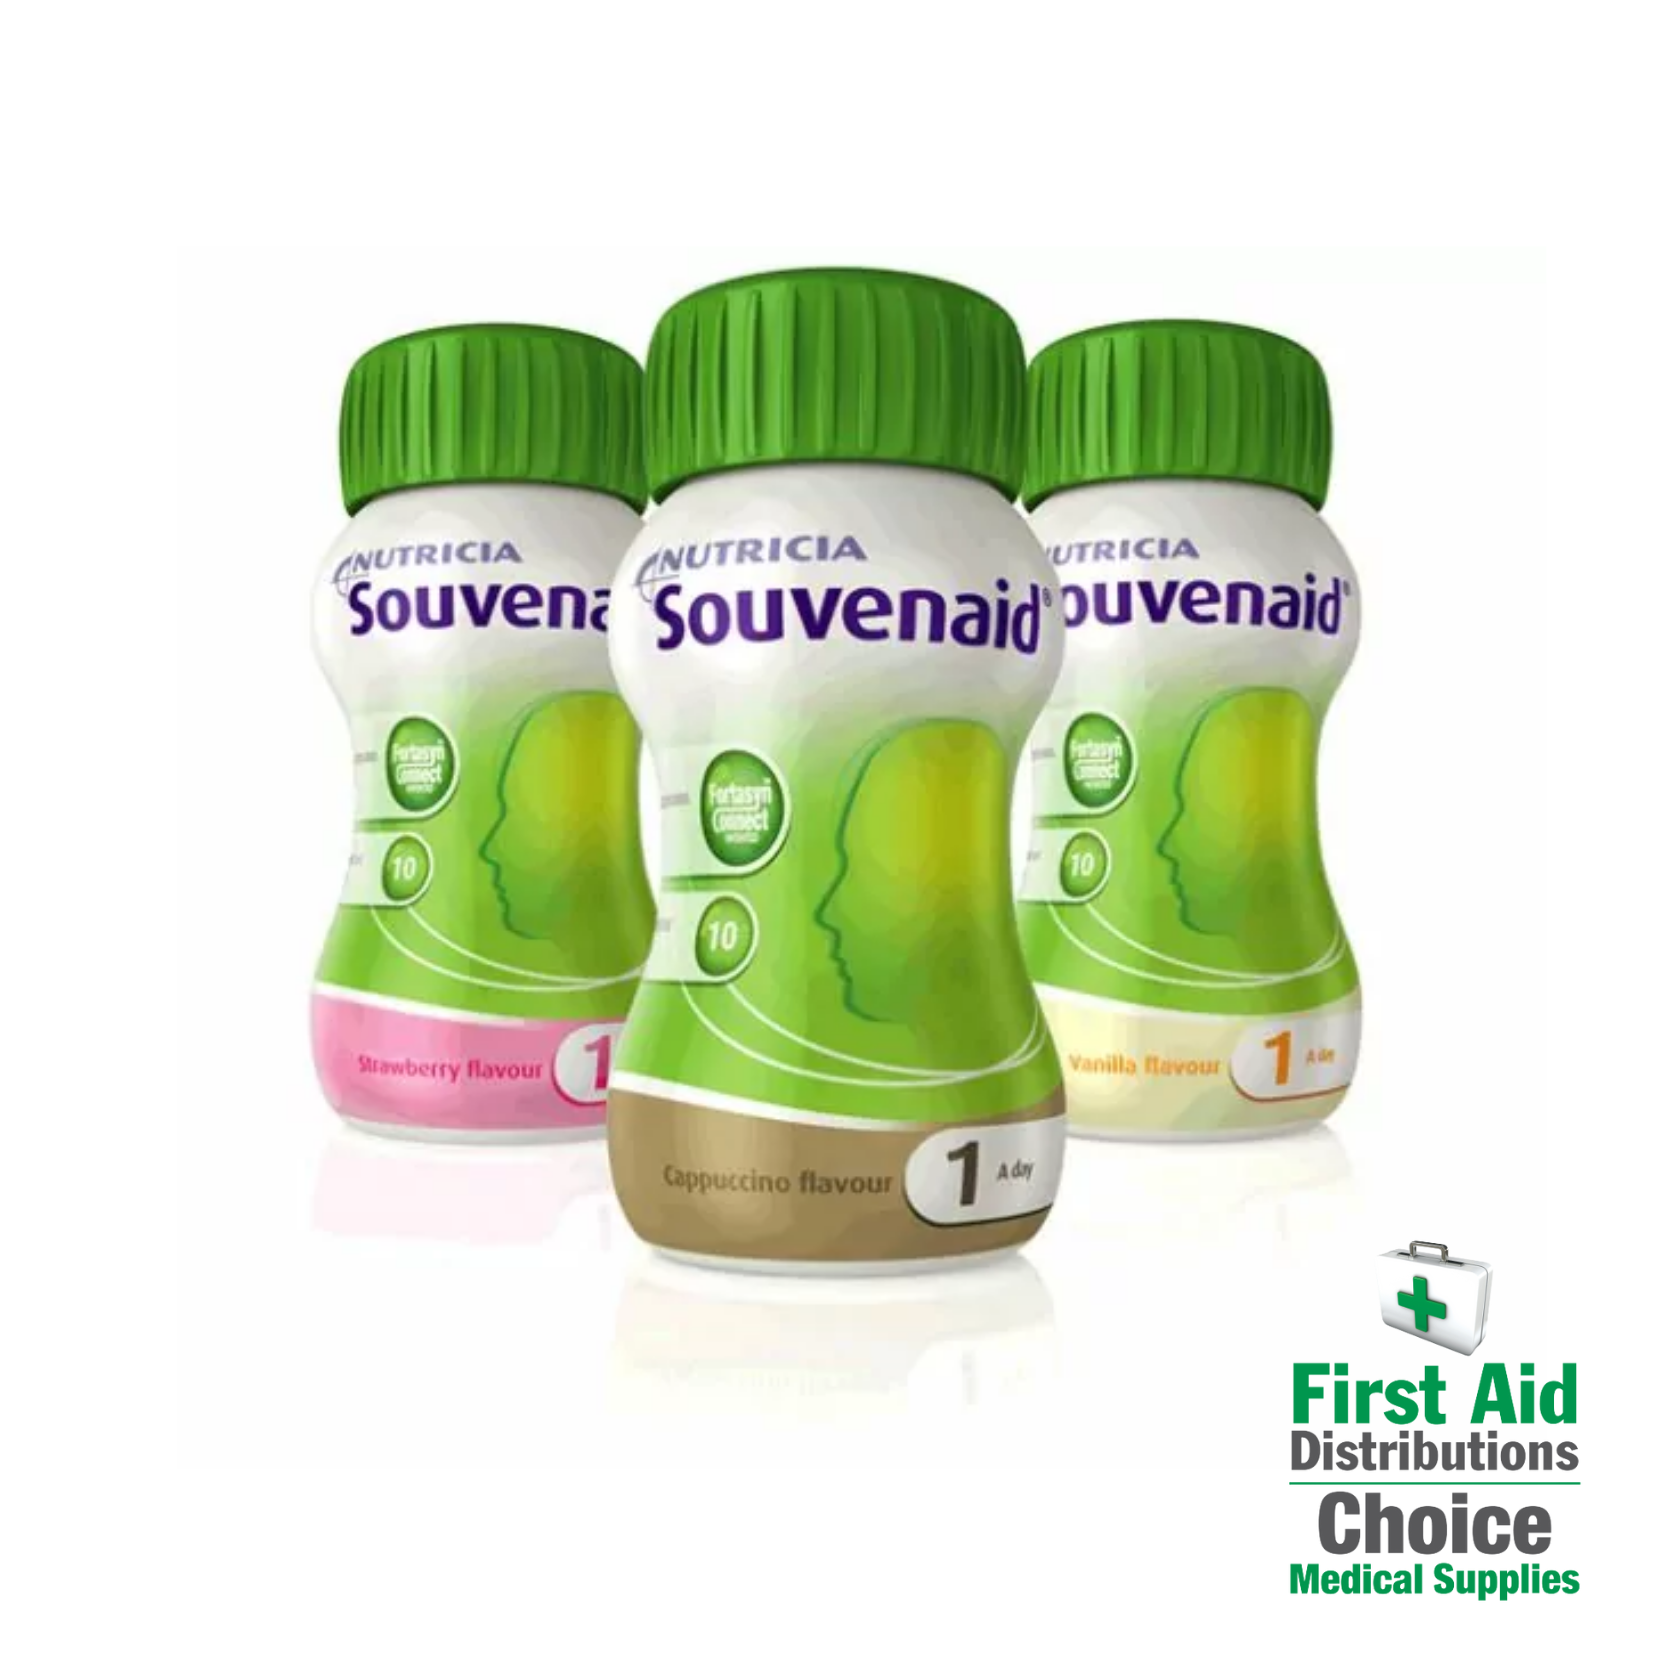 collections/Nutricia_Souvenaid_All_First_Aid_Distributions.png